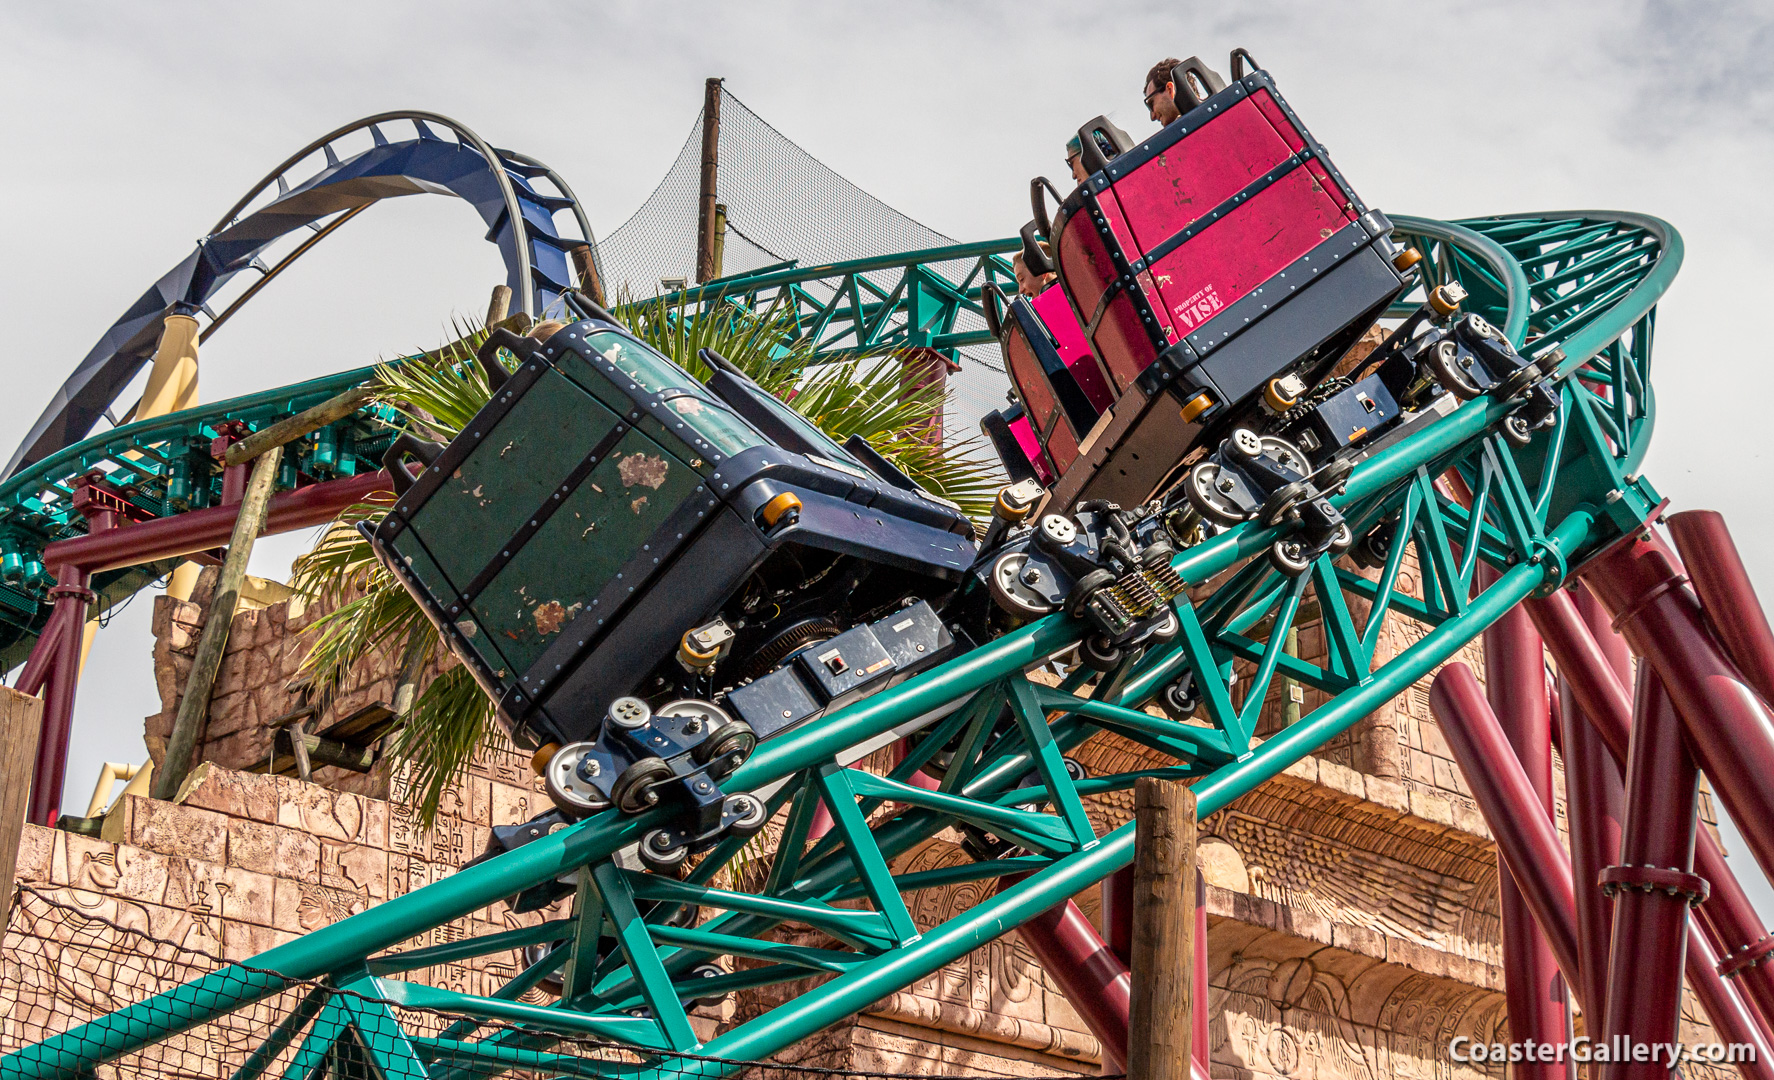 Pictures and videos of the Cobra's Curse roller coaster in Tampa, Florida